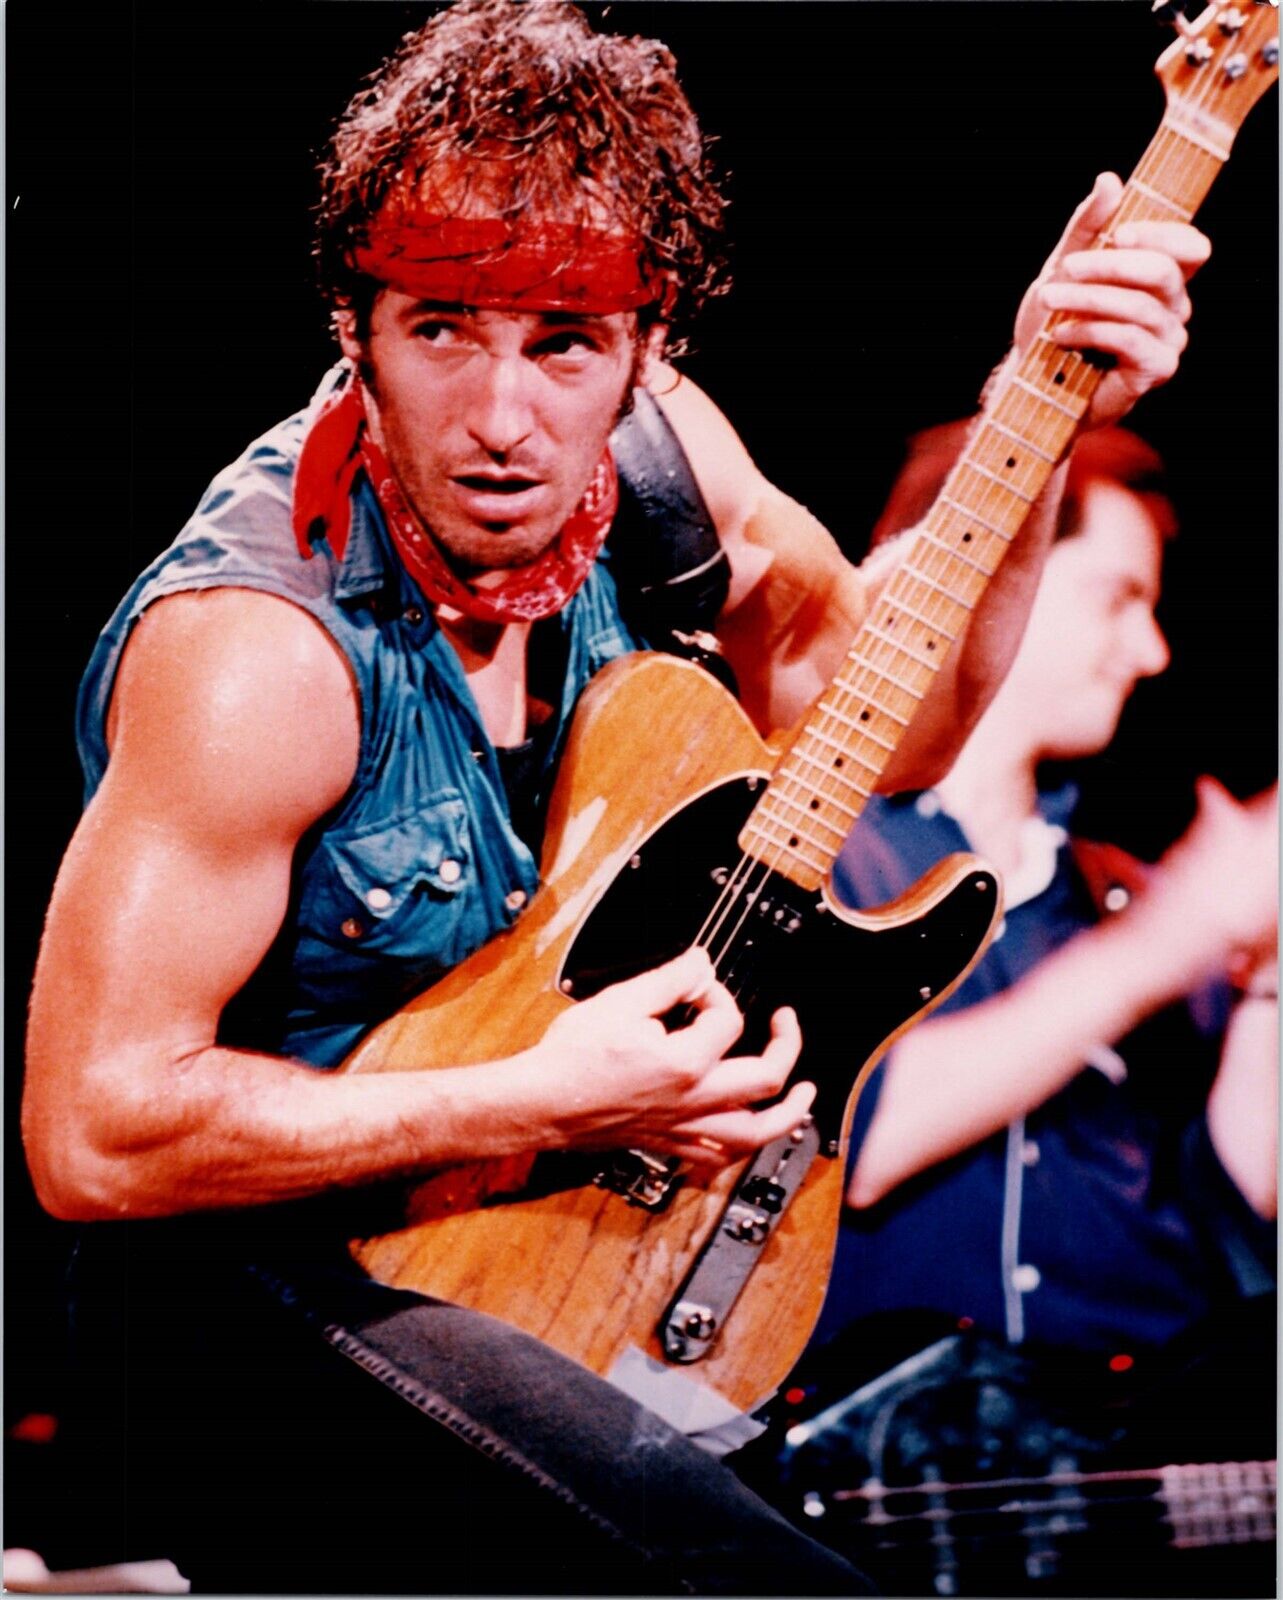 Bruce Springsteen iconic image 1980's on stage playing guitar vintage 8x10 photo